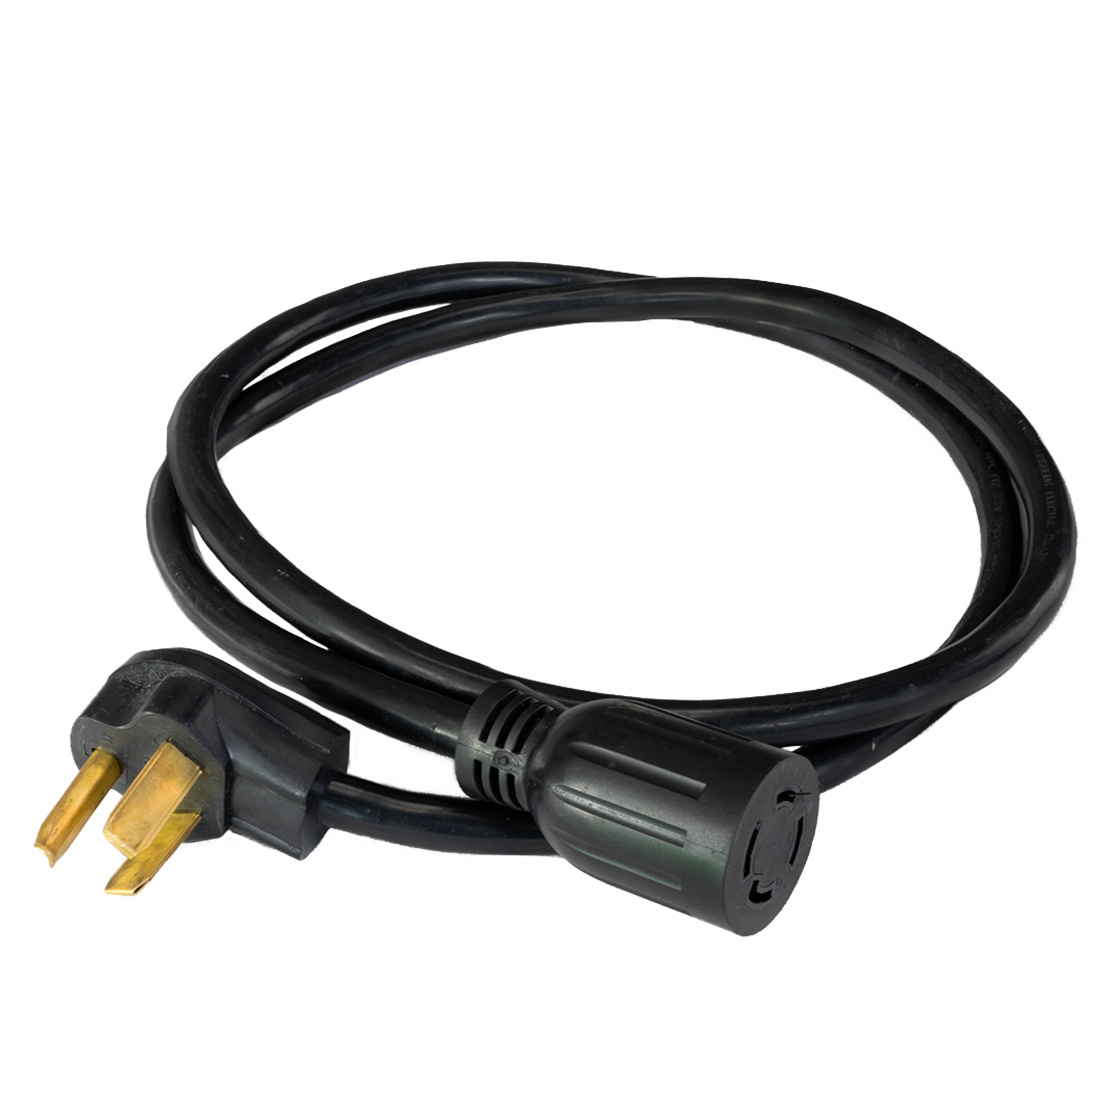 TurtlePro - 3 Wire Old Dryer Adapter